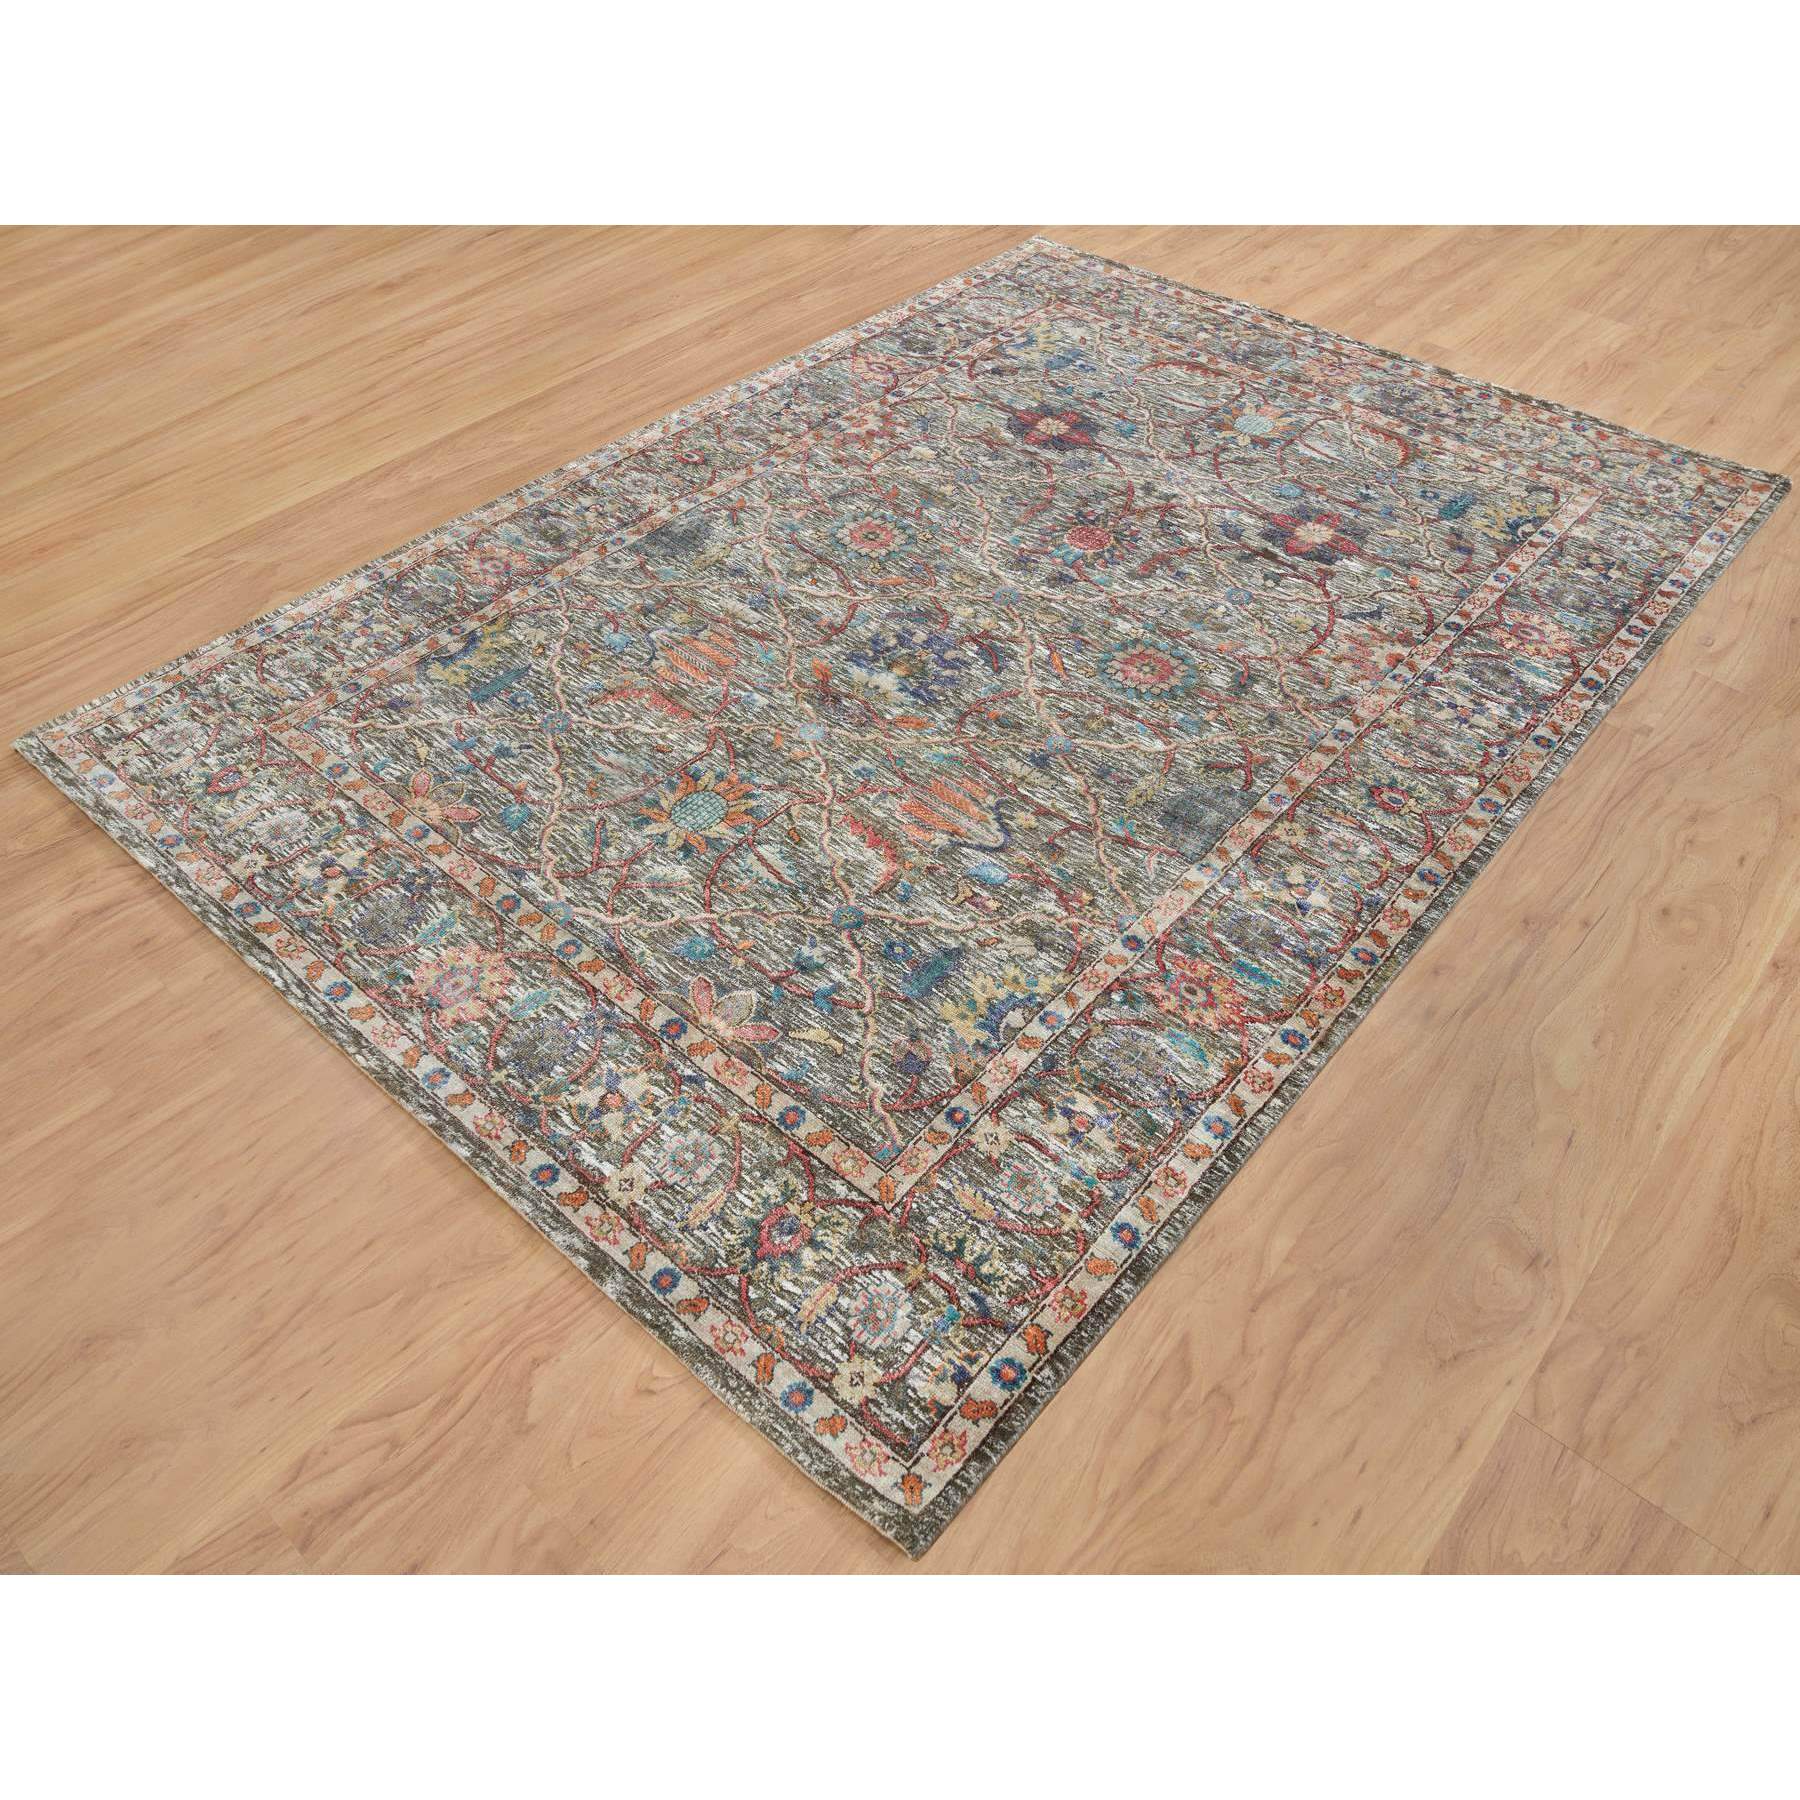  Silk Hand-Knotted Area Rug 6'4